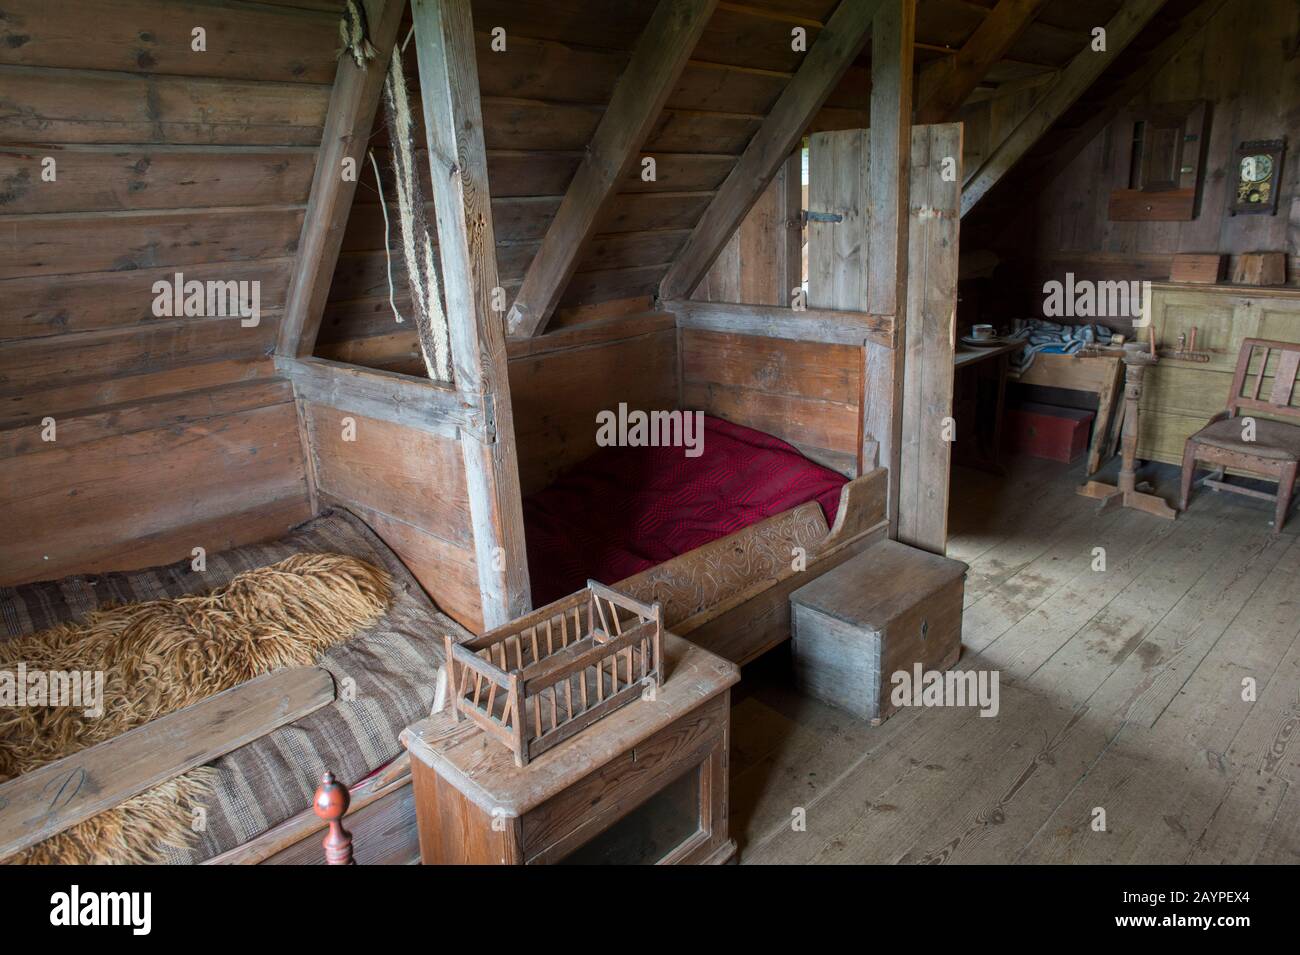 The kids room of a traditional turf house at the Skogar folk museum in southern Iceland. Stock Photo